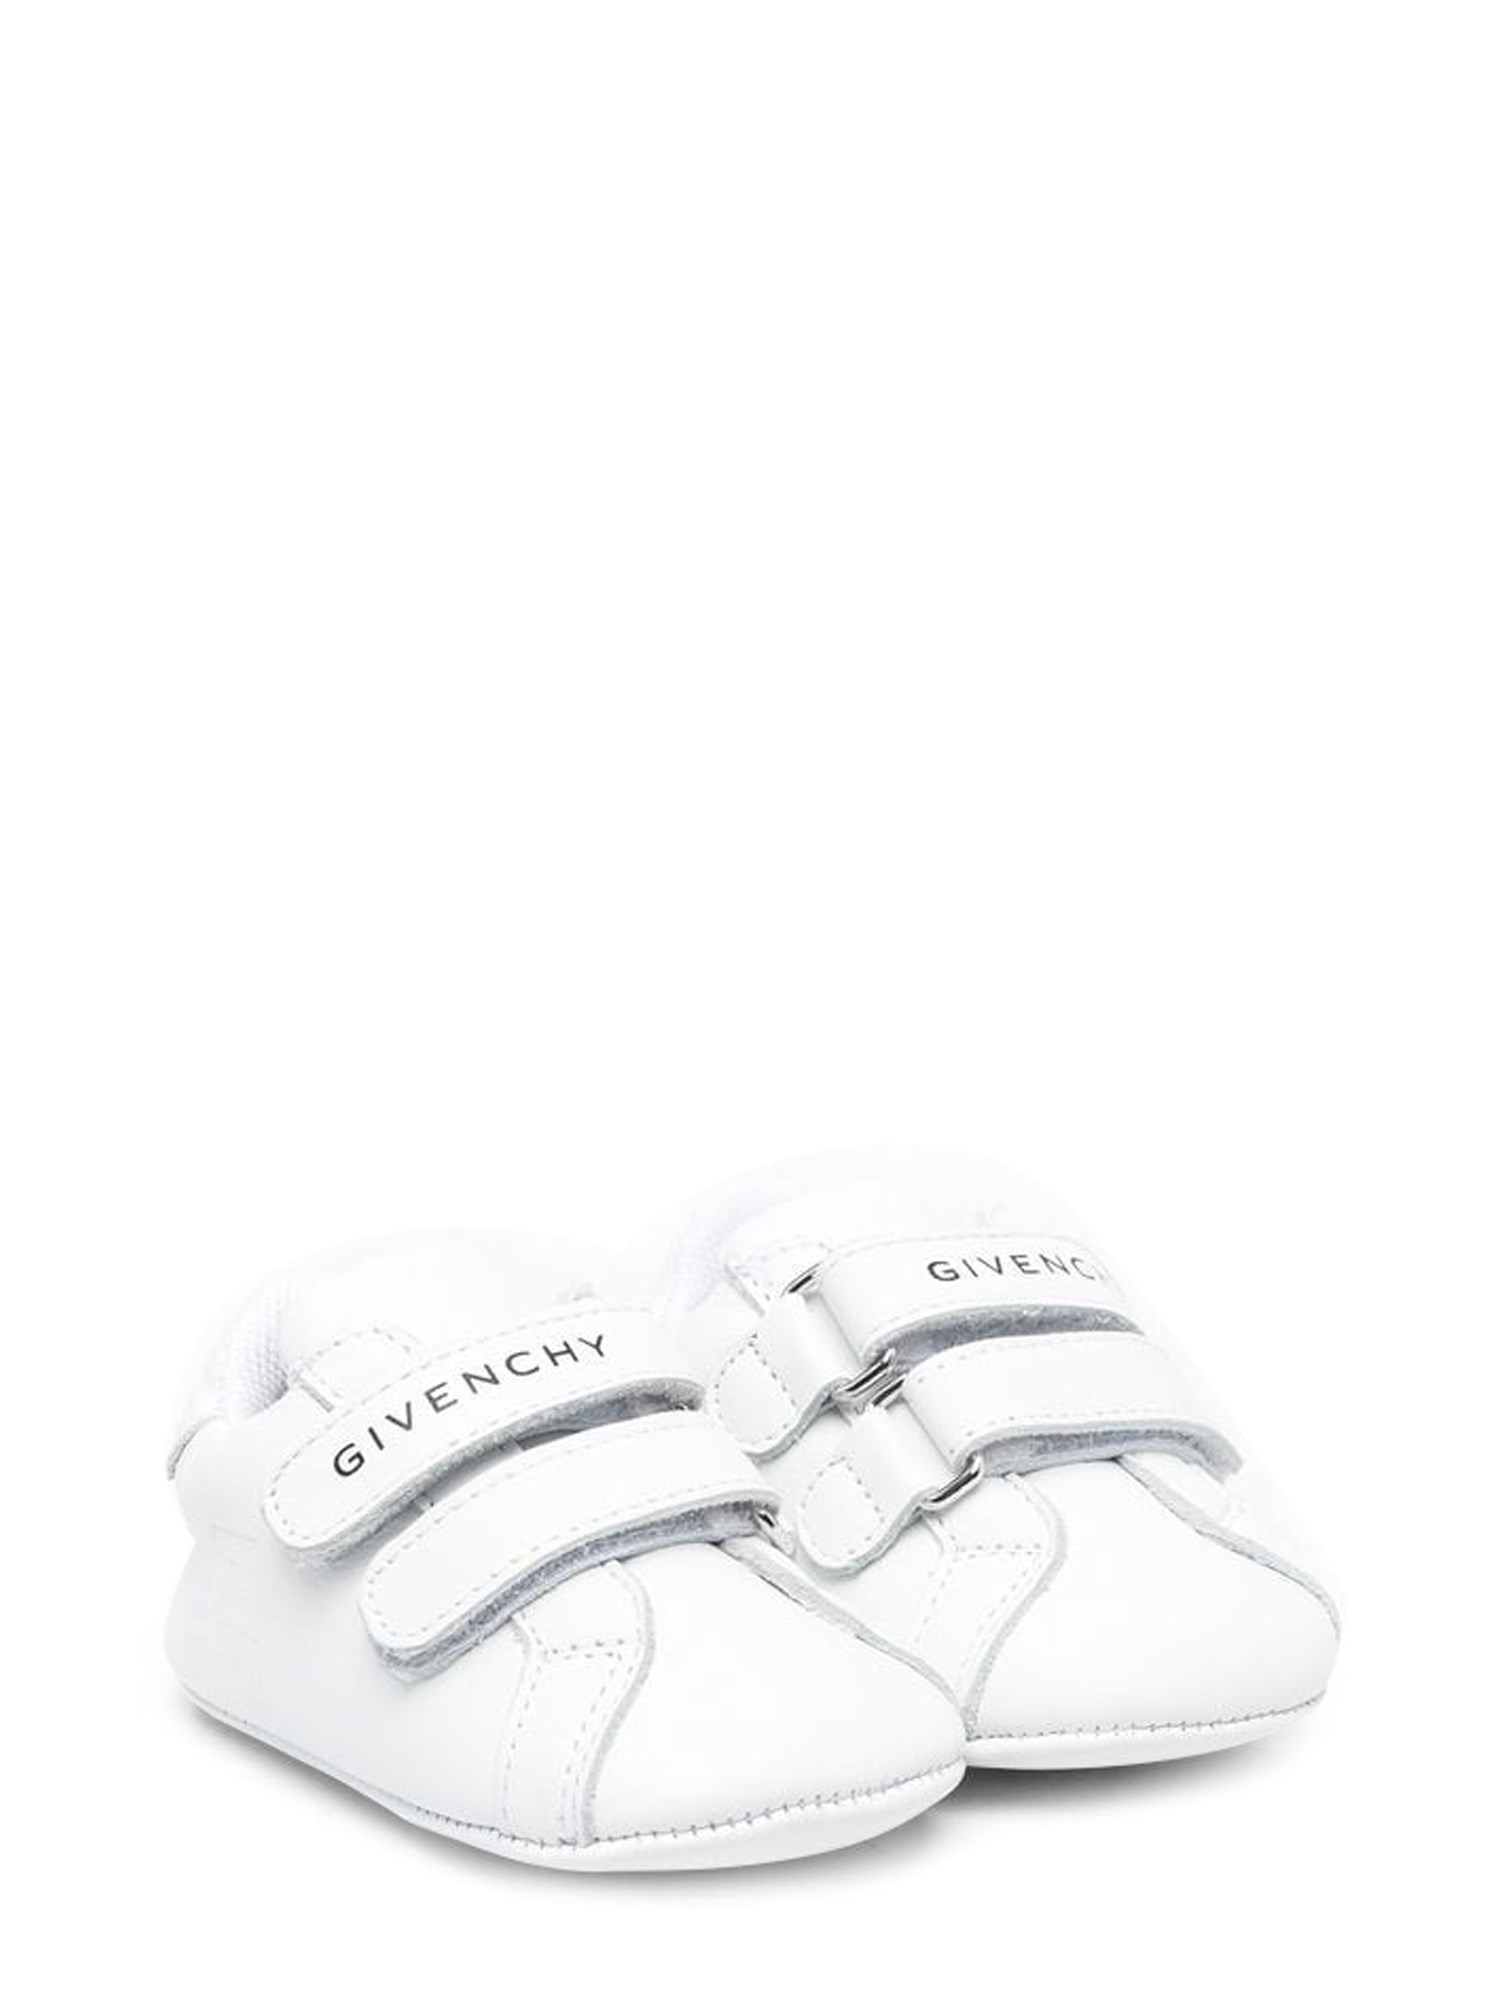 givenchy cradle shoes